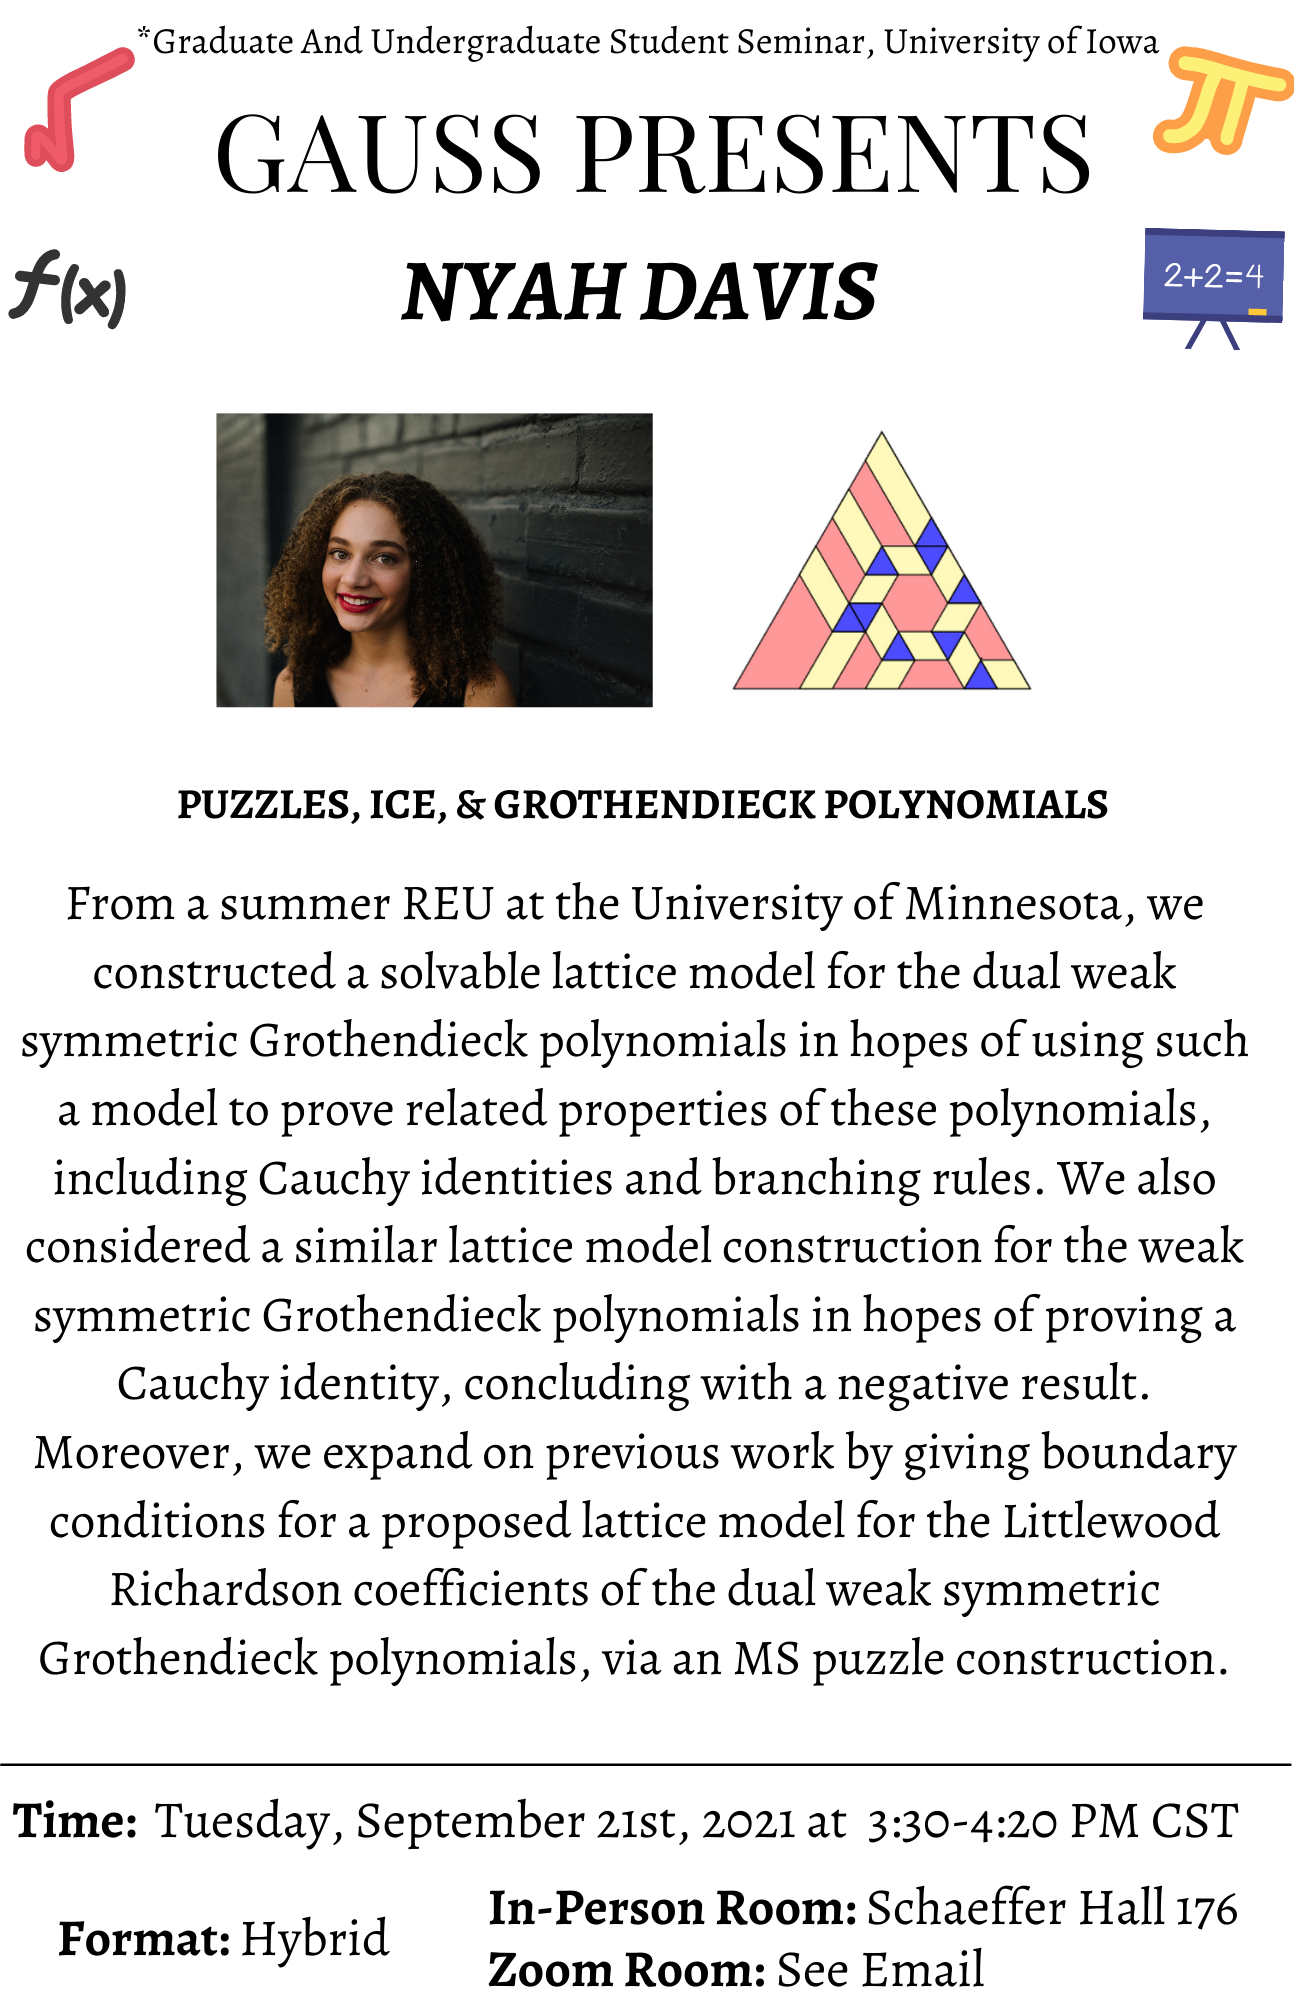 Picture of speaker Nyah Davis and text From a summer REU at the University of Minnesota, we constructed a solvable lattice model for the dual weak symmetric Grothendieck polynomials in hopes of using such a model to prove related properties ...